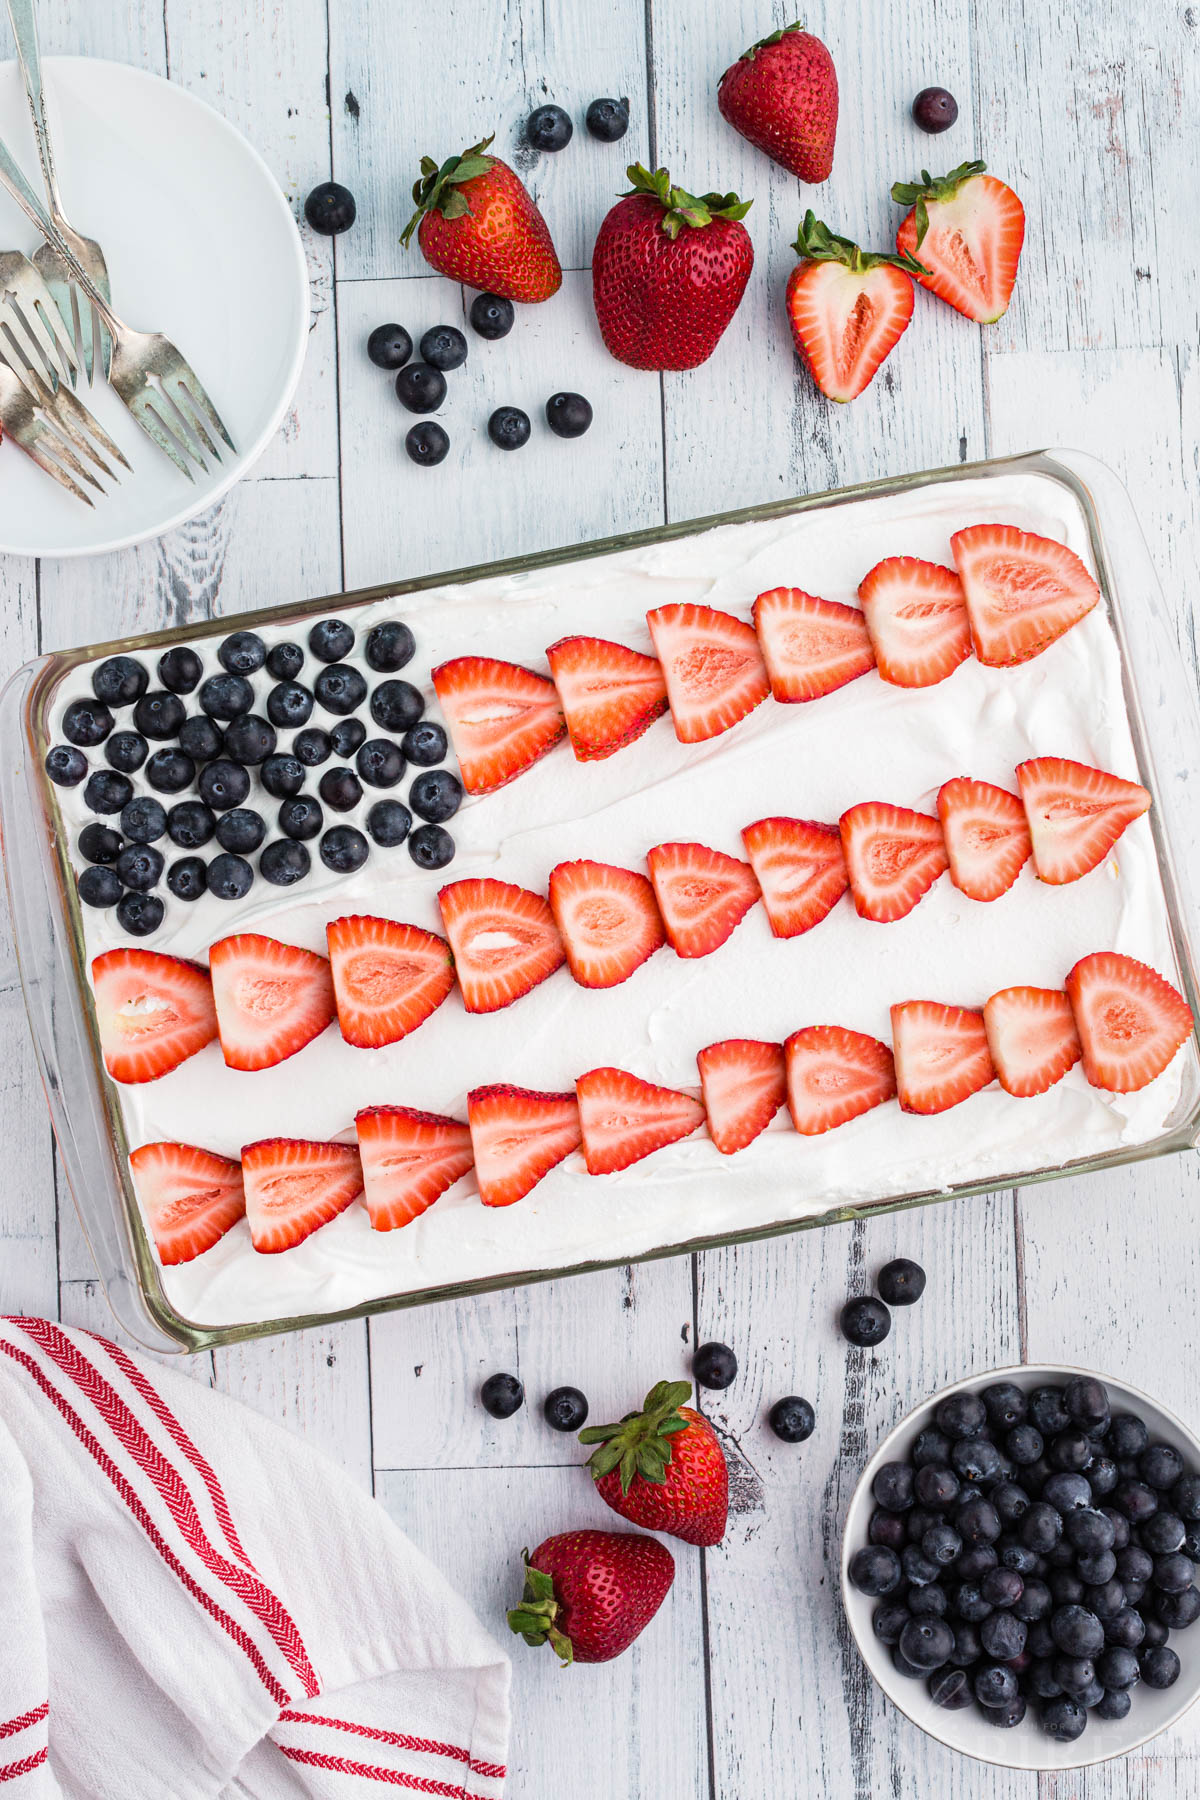 Blueberries and sliced strawberries forming a flag pattern over the top of the cake.